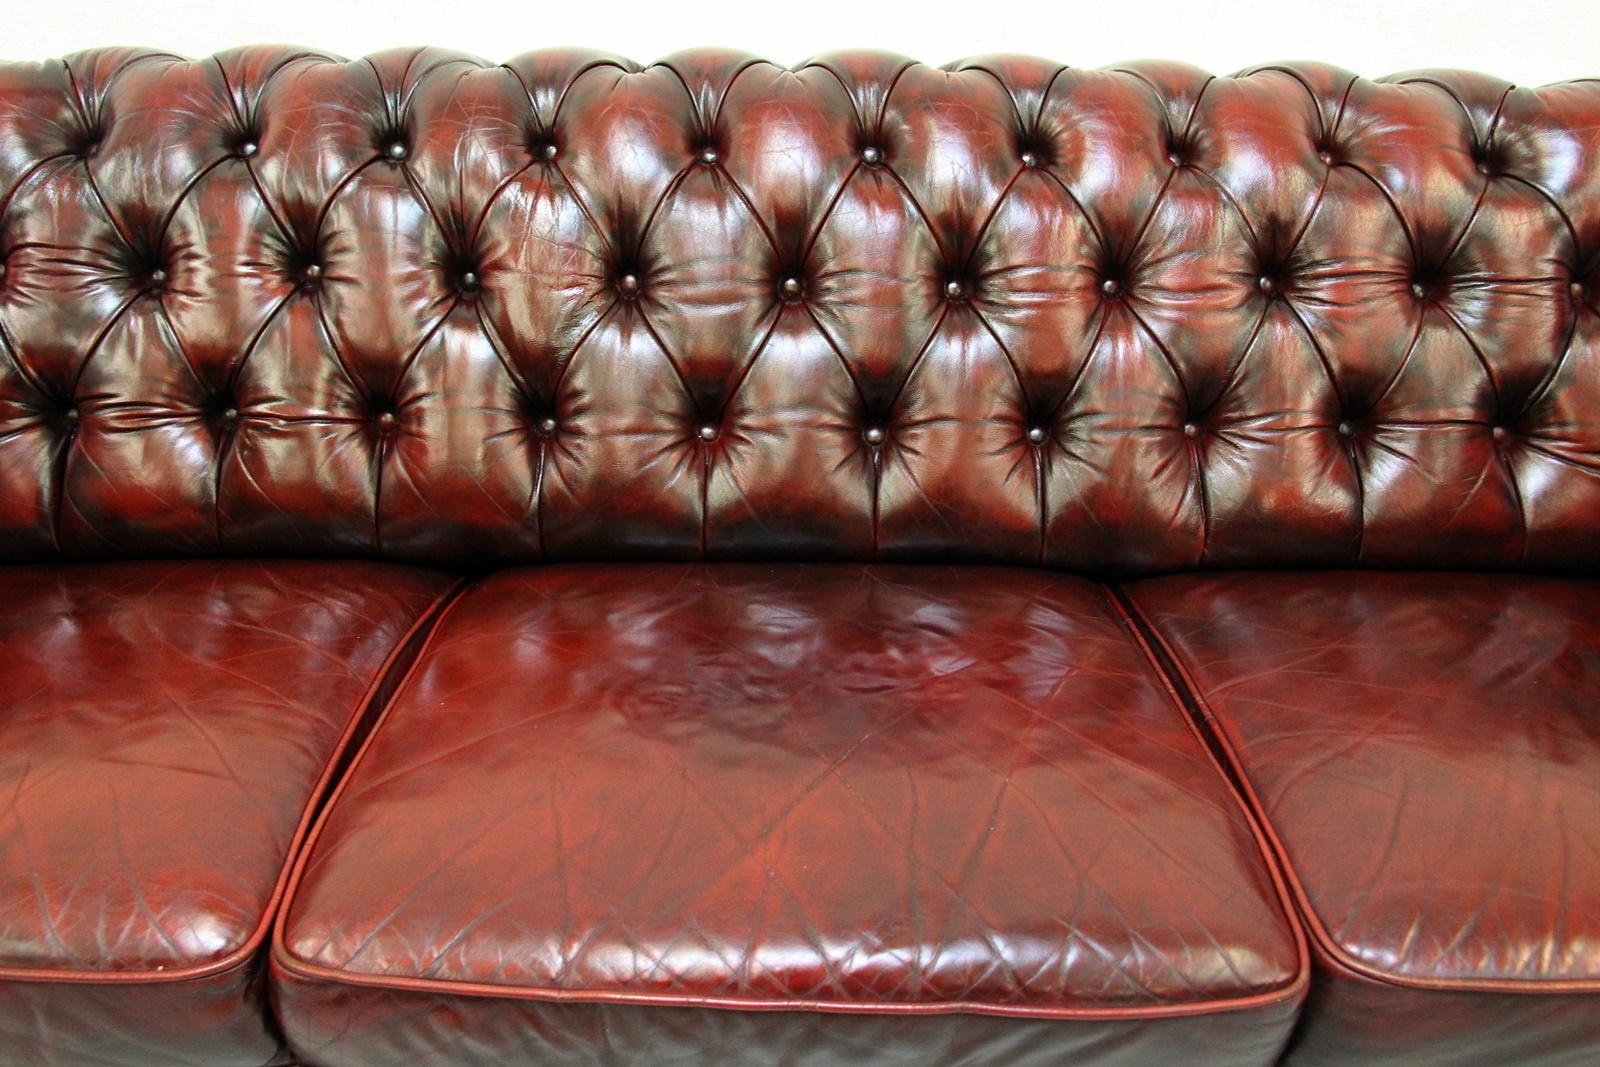 Chesterfield real leather threesome sofa
in original design
Very comfortable and with beautiful patina
Condition: The sofa is in a very good condition
sofa
Measures: Height x 78cm, length x 210cm, depth x 90cm
Cushion is in good condition with